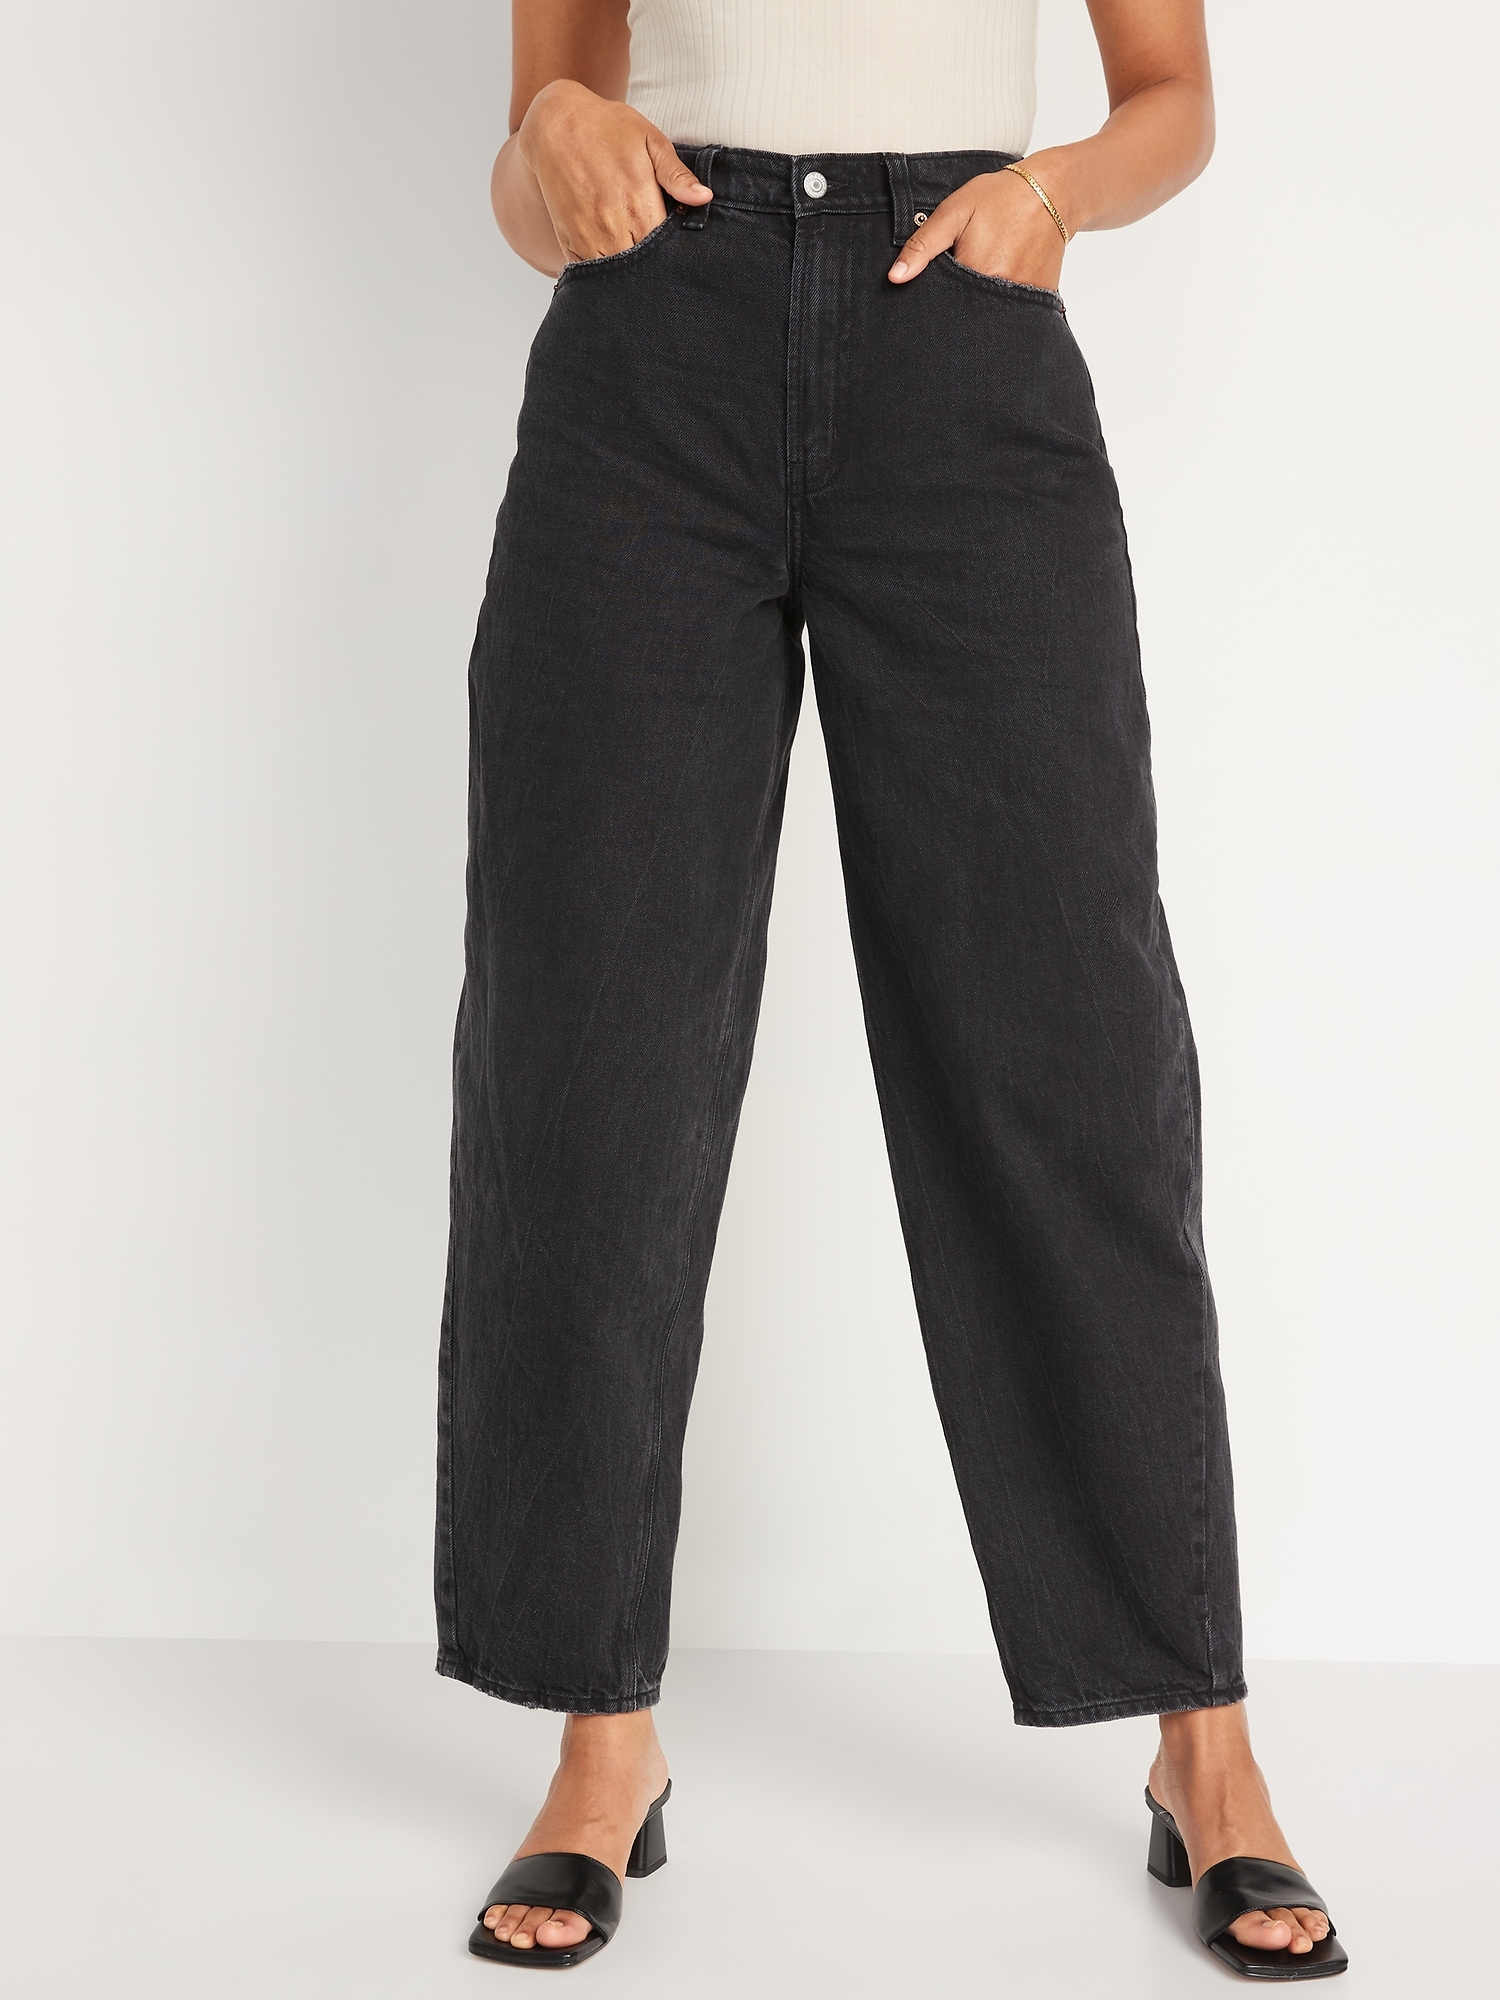 Old Navy Extra High-Waisted Balloon Ankle Jeans black. 1